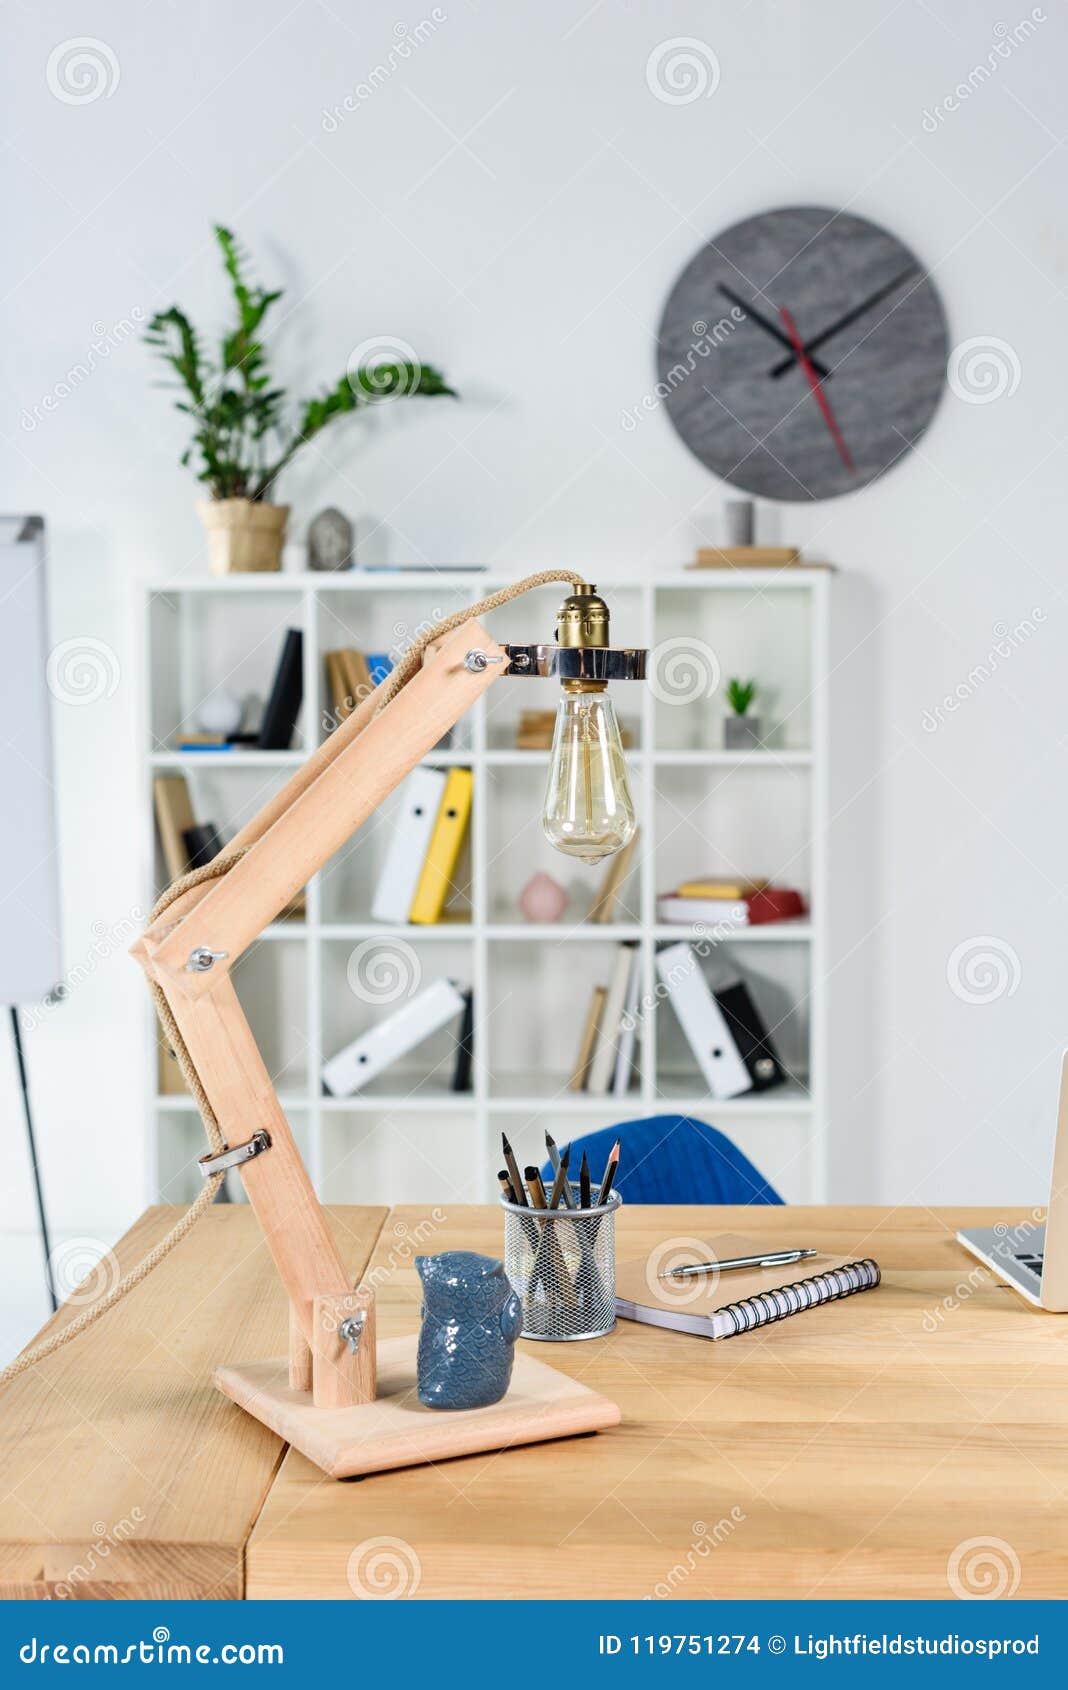 modern office interior with wooden table, desklamp and stationery placed